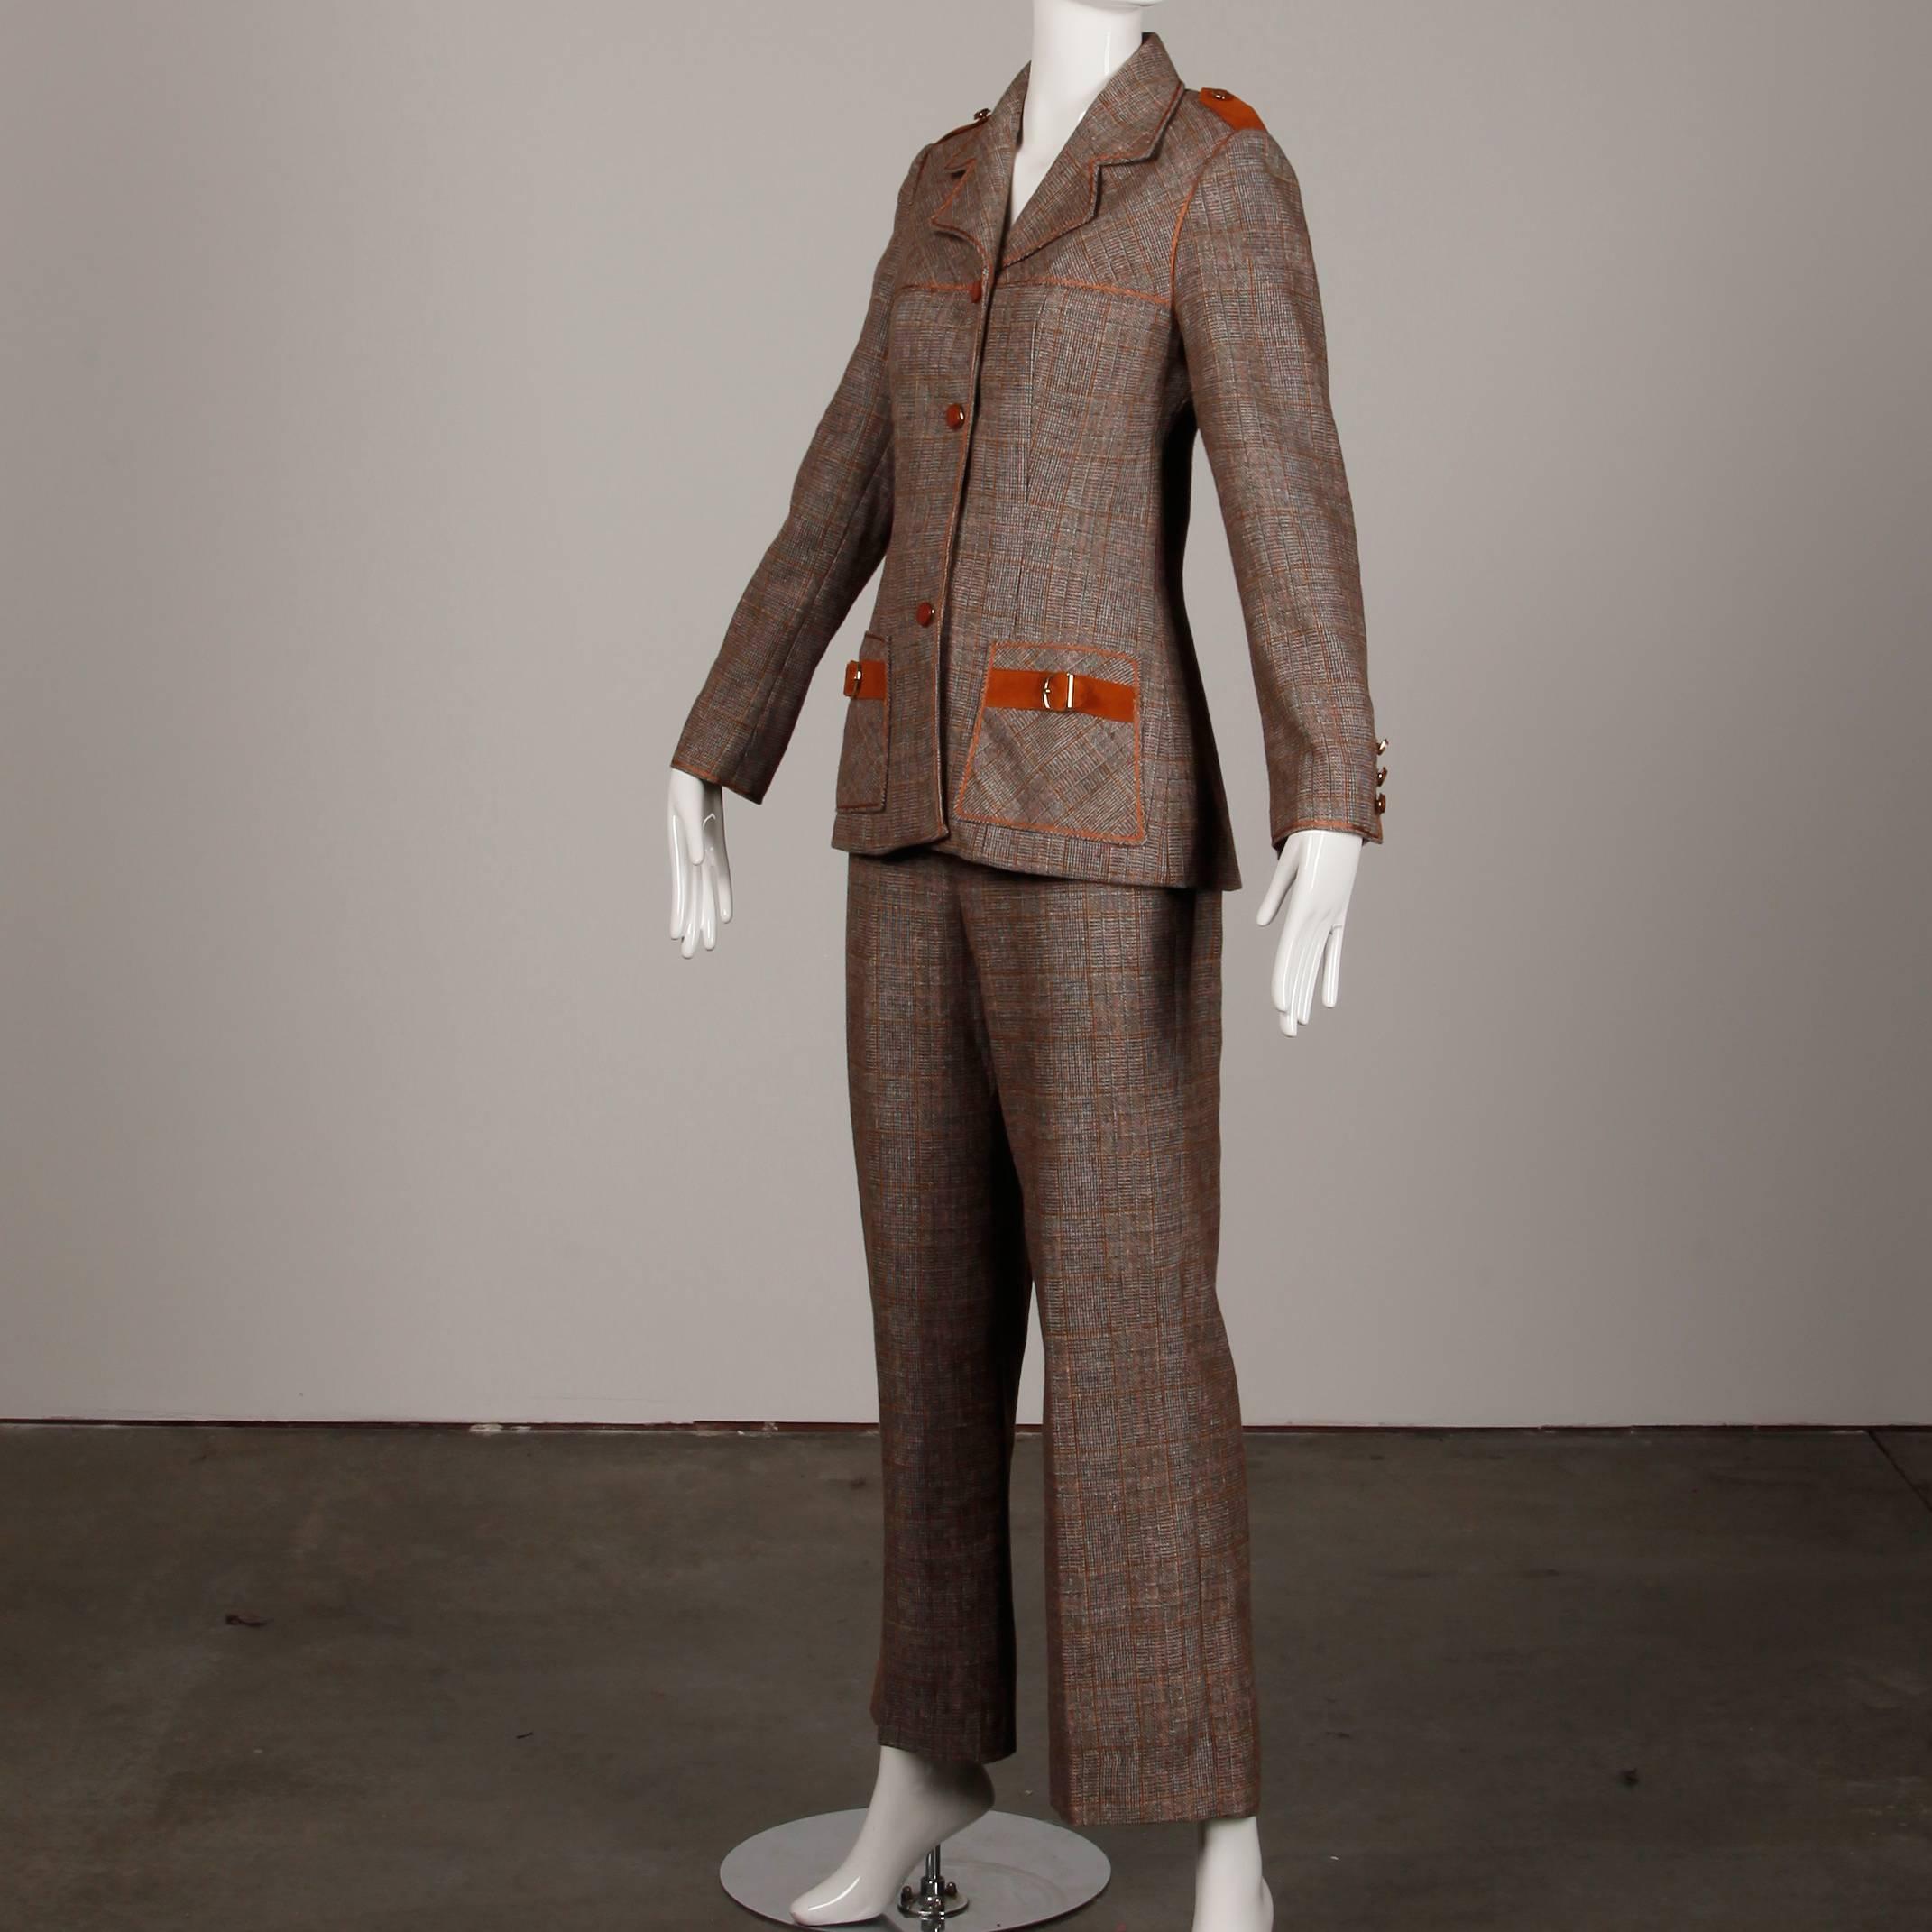 Details: Jacket

Fully Lined
Front Box Pockets
Button Front Closure
Marked Size: Not Marked
Color: Rust/ Brown/ White
Fabric: Wool
Label: Lilli Ann San Francisco

Measurements: 

Bust: 36"
Waist: 30"
Hips: 36"
Shoulders: